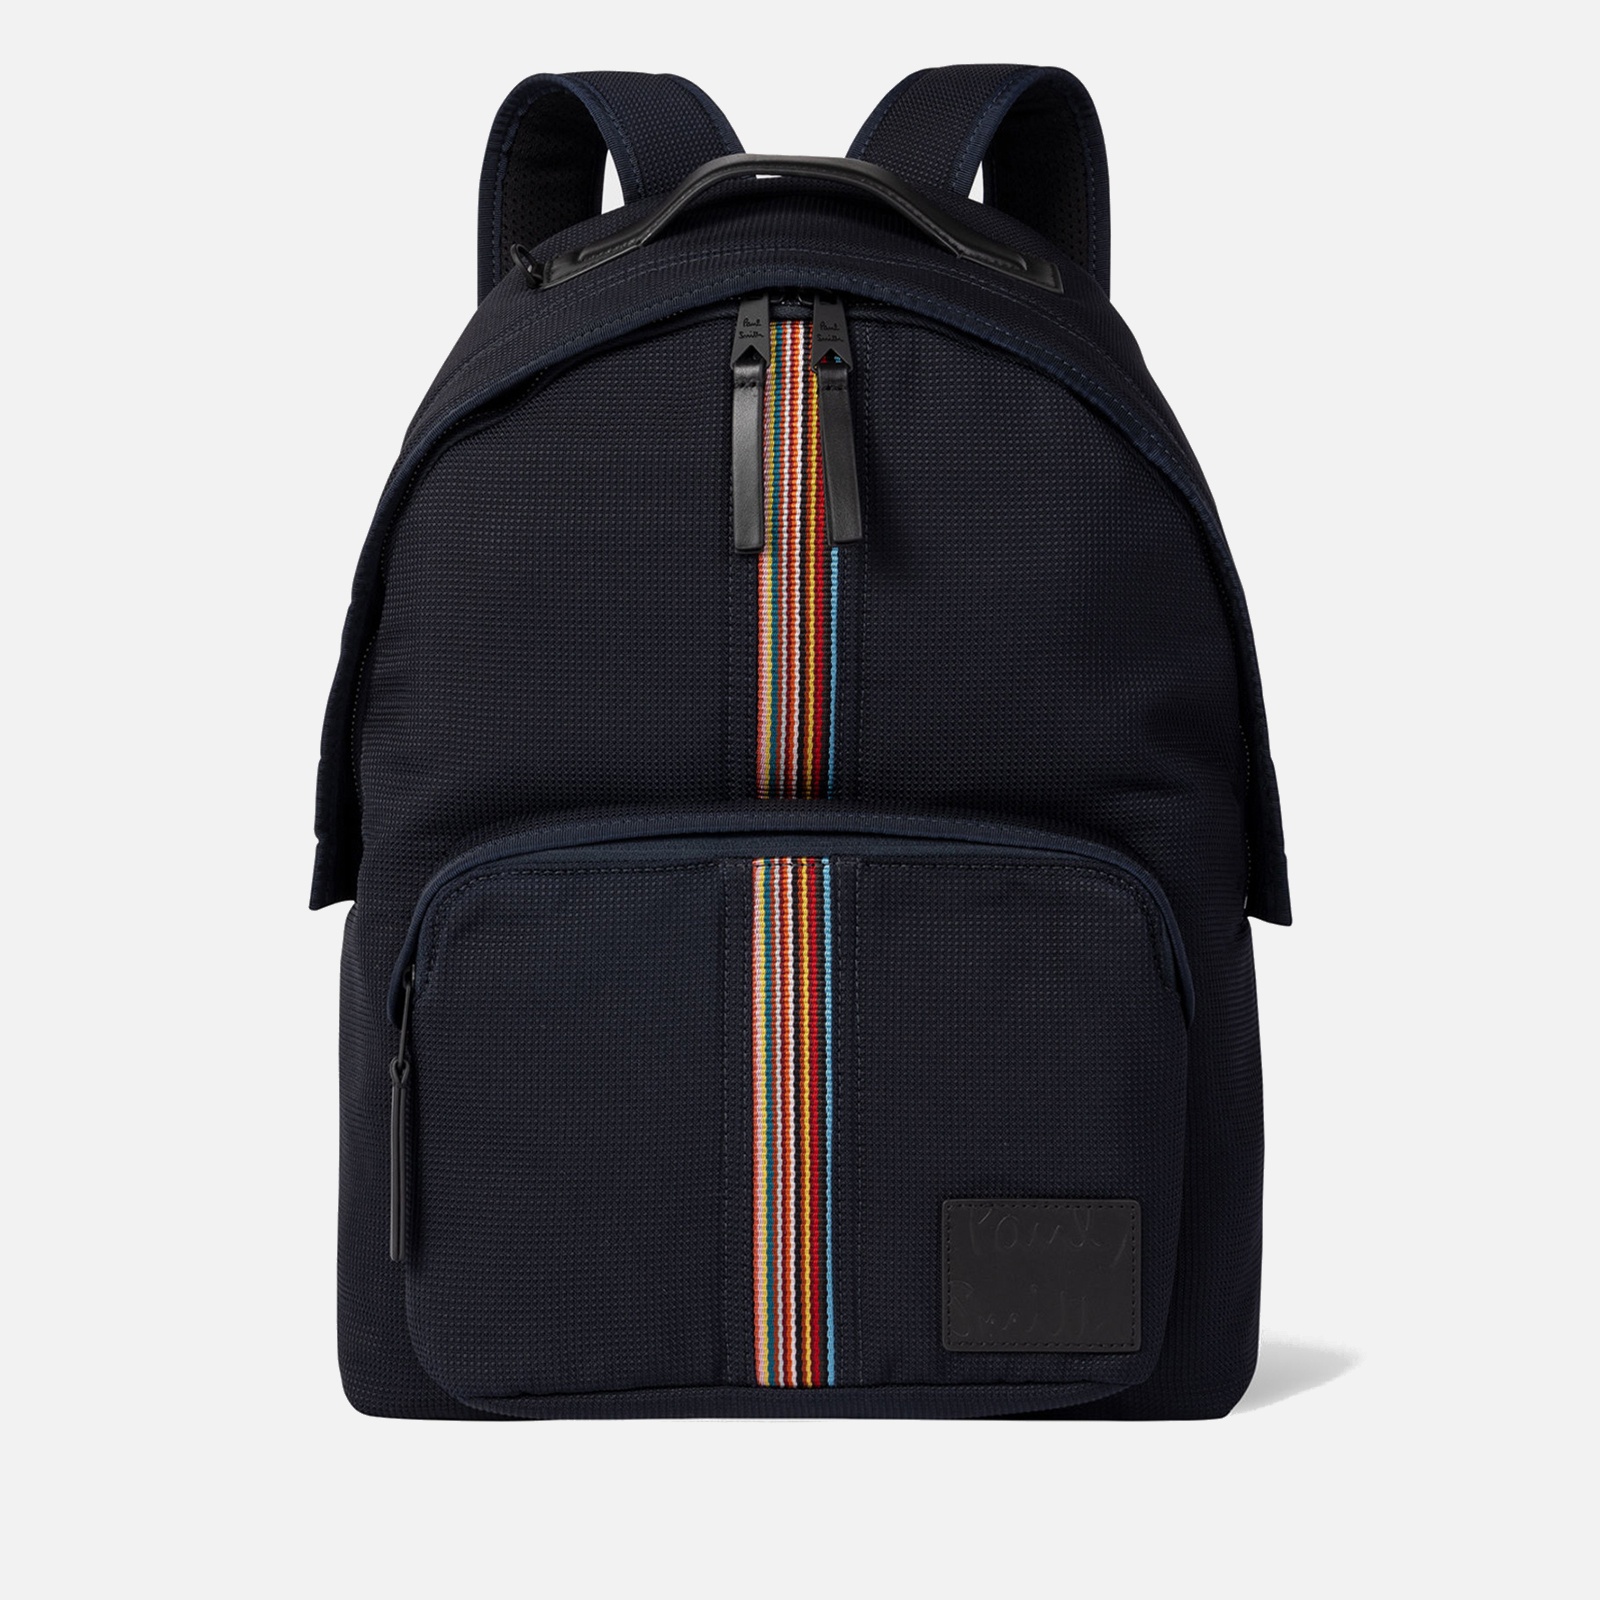 Paul Smith Canvas Backpack - 1